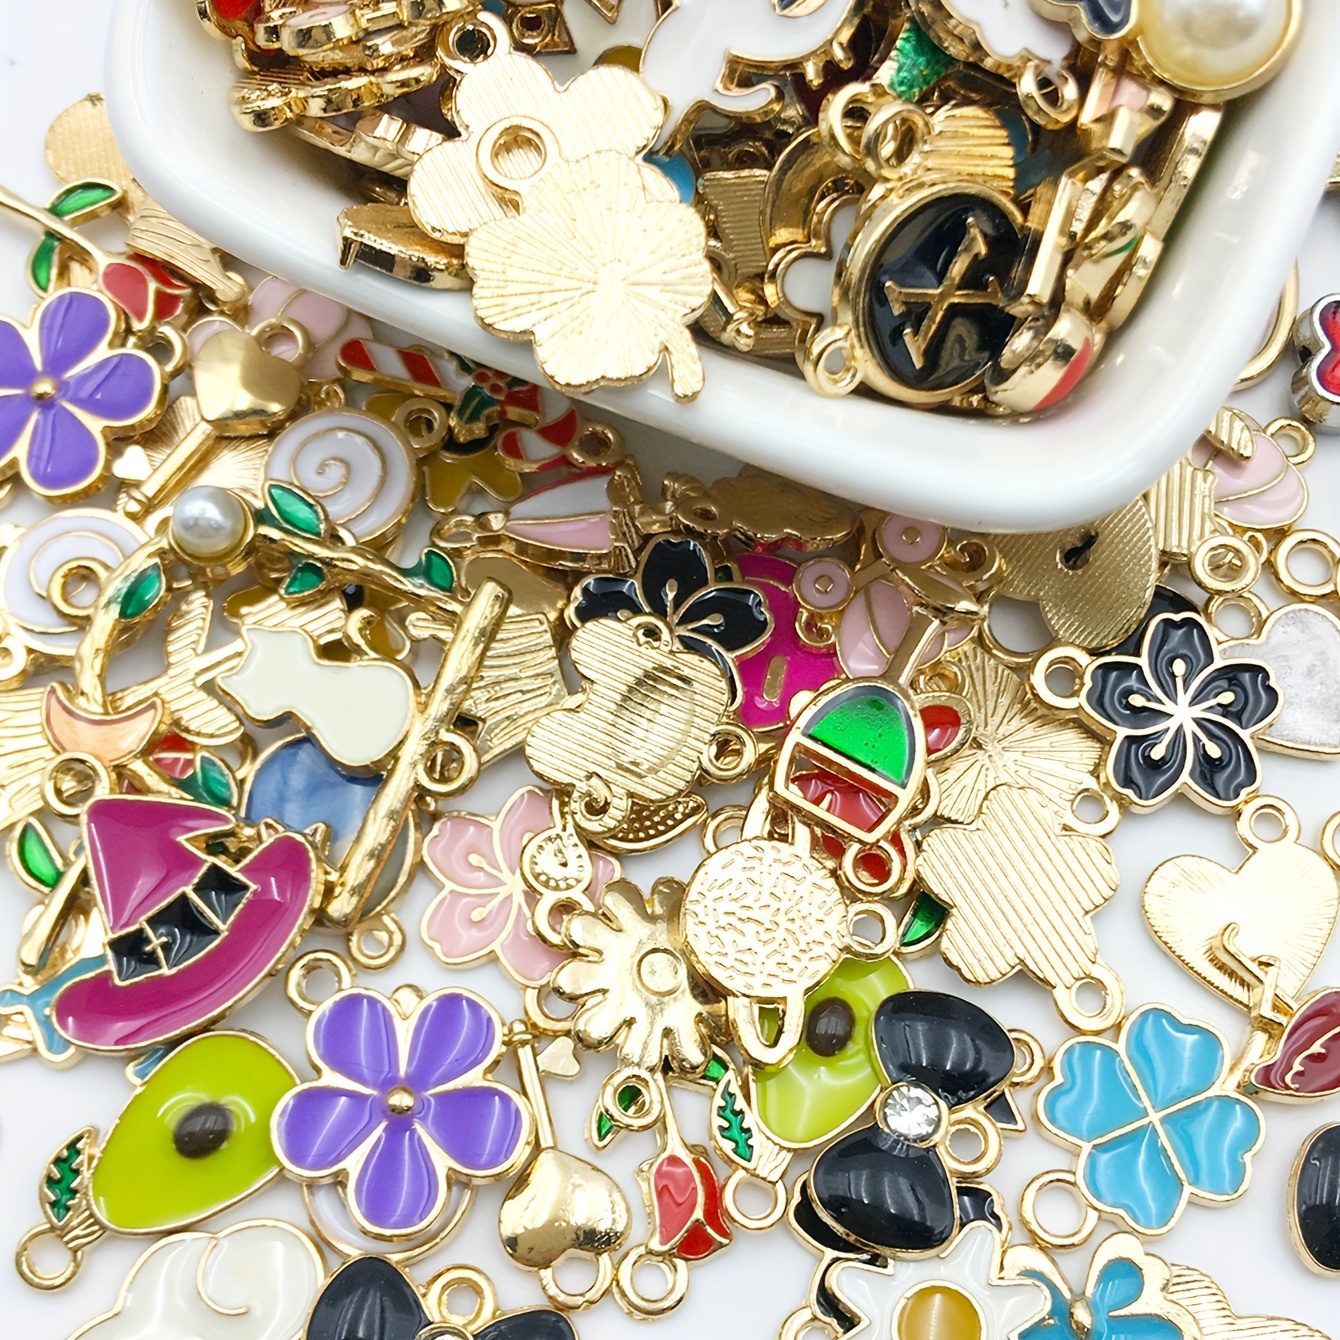 50 Pcs or 100 Pcs Random Collection of Pendant, Charms, for Your Necklace  DIY Projects, Alloy Metal, Charms Diy Necklace 